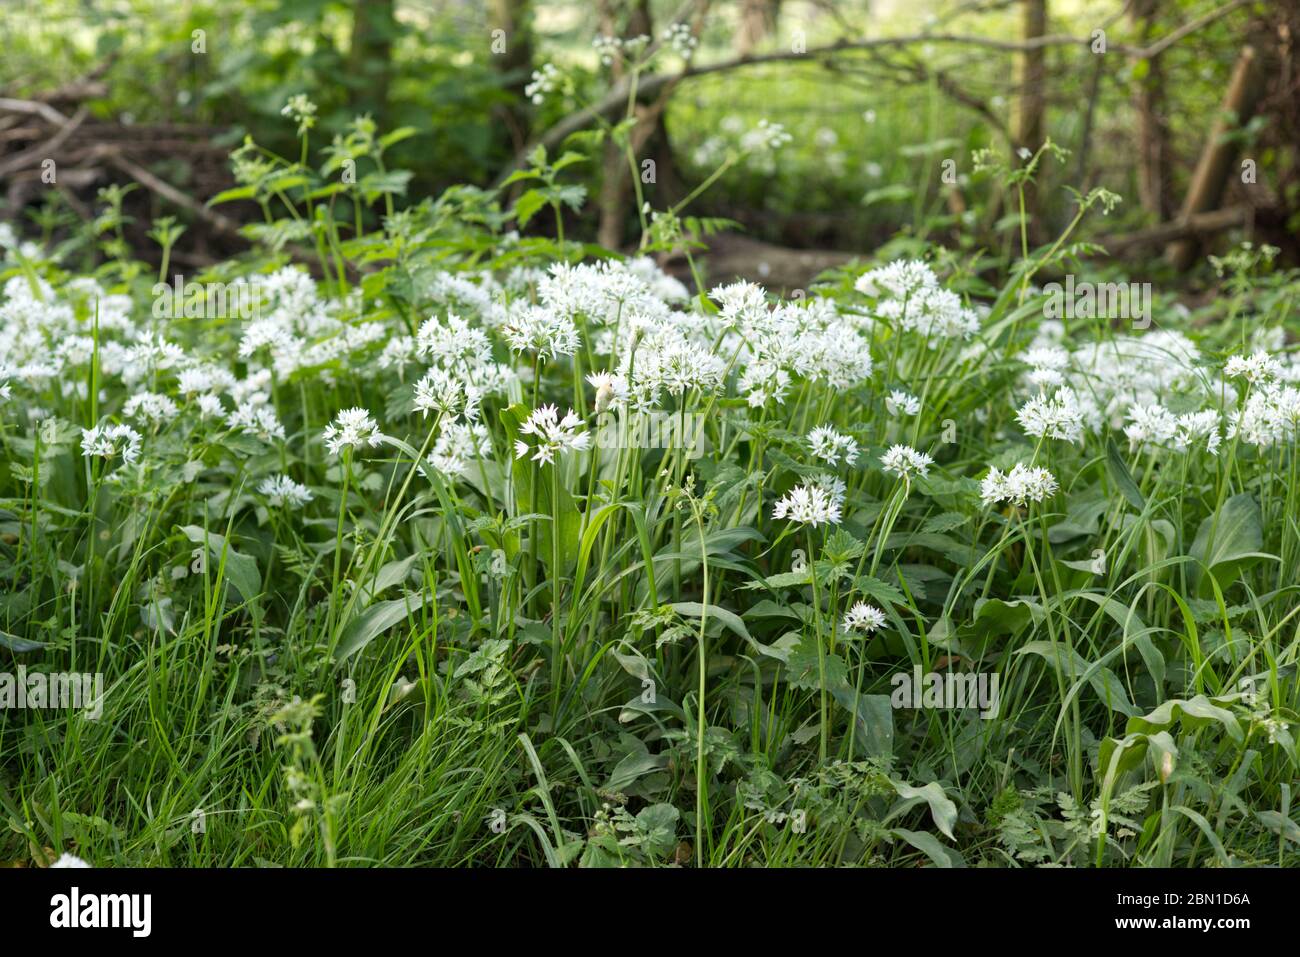 wild garlic growing in the countryside among grasses and weeds Stock Photo